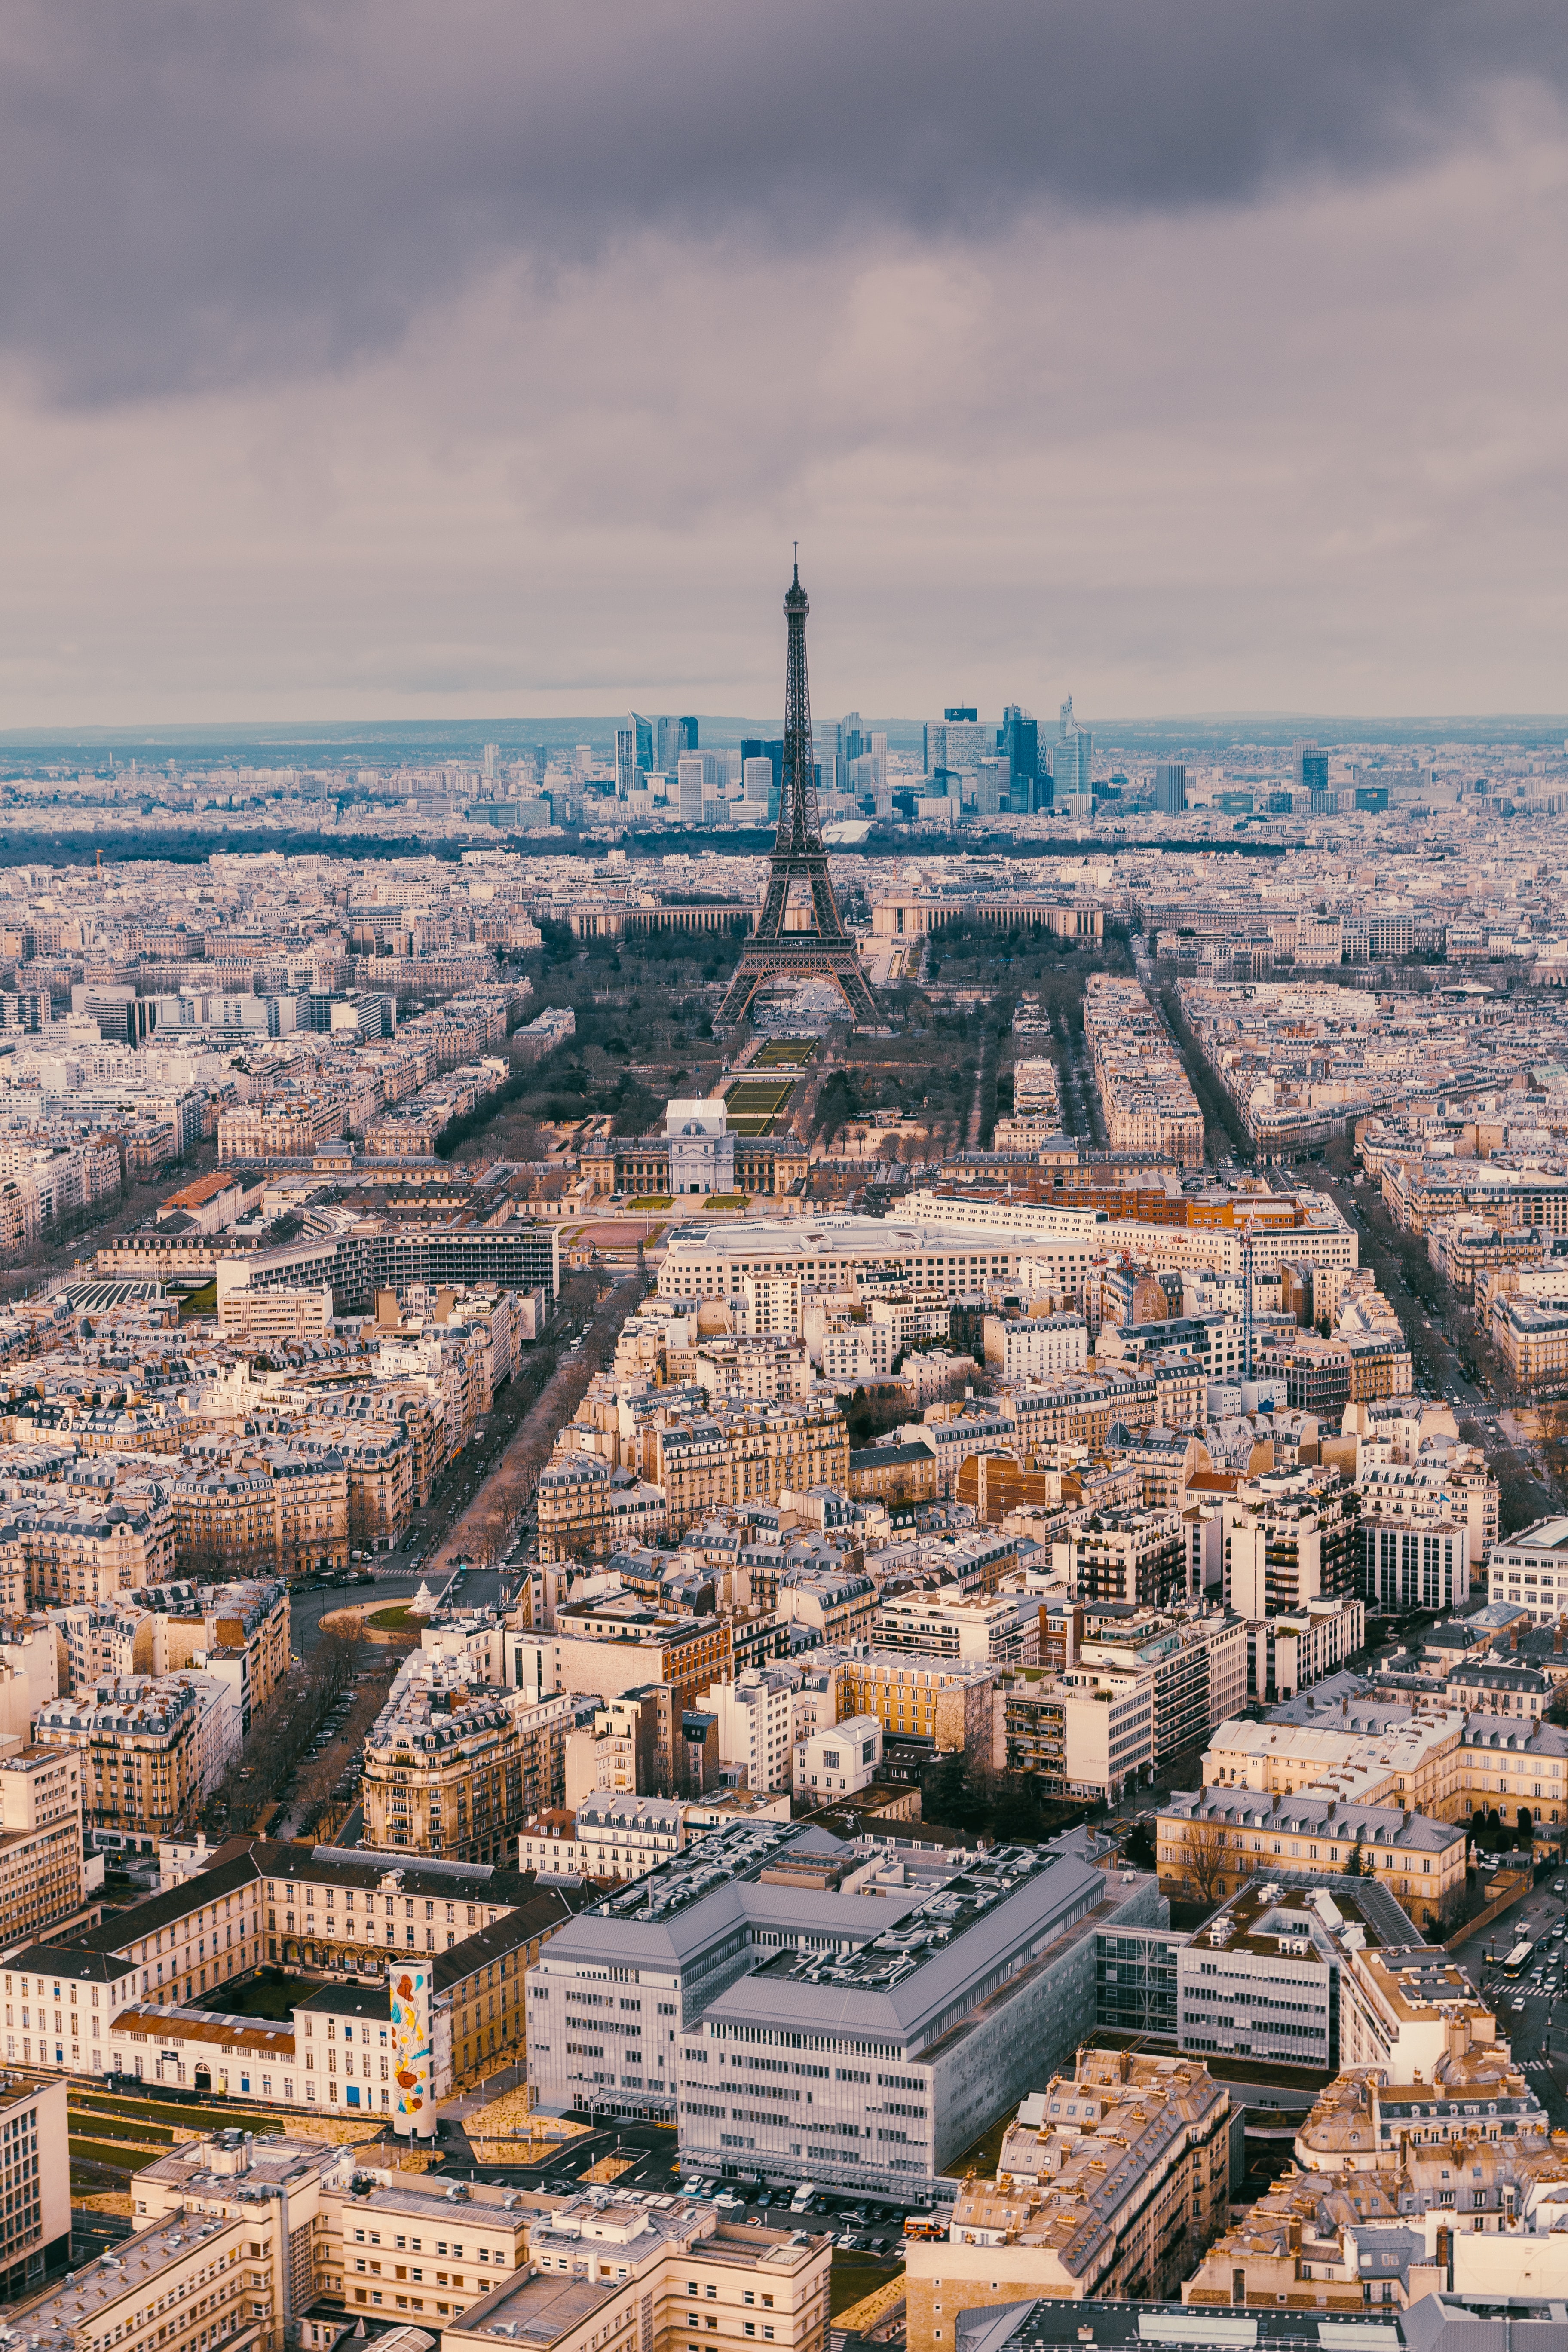 android view from above, city, paris, eiffel tower, cities, urban landscape, cityscape, tower